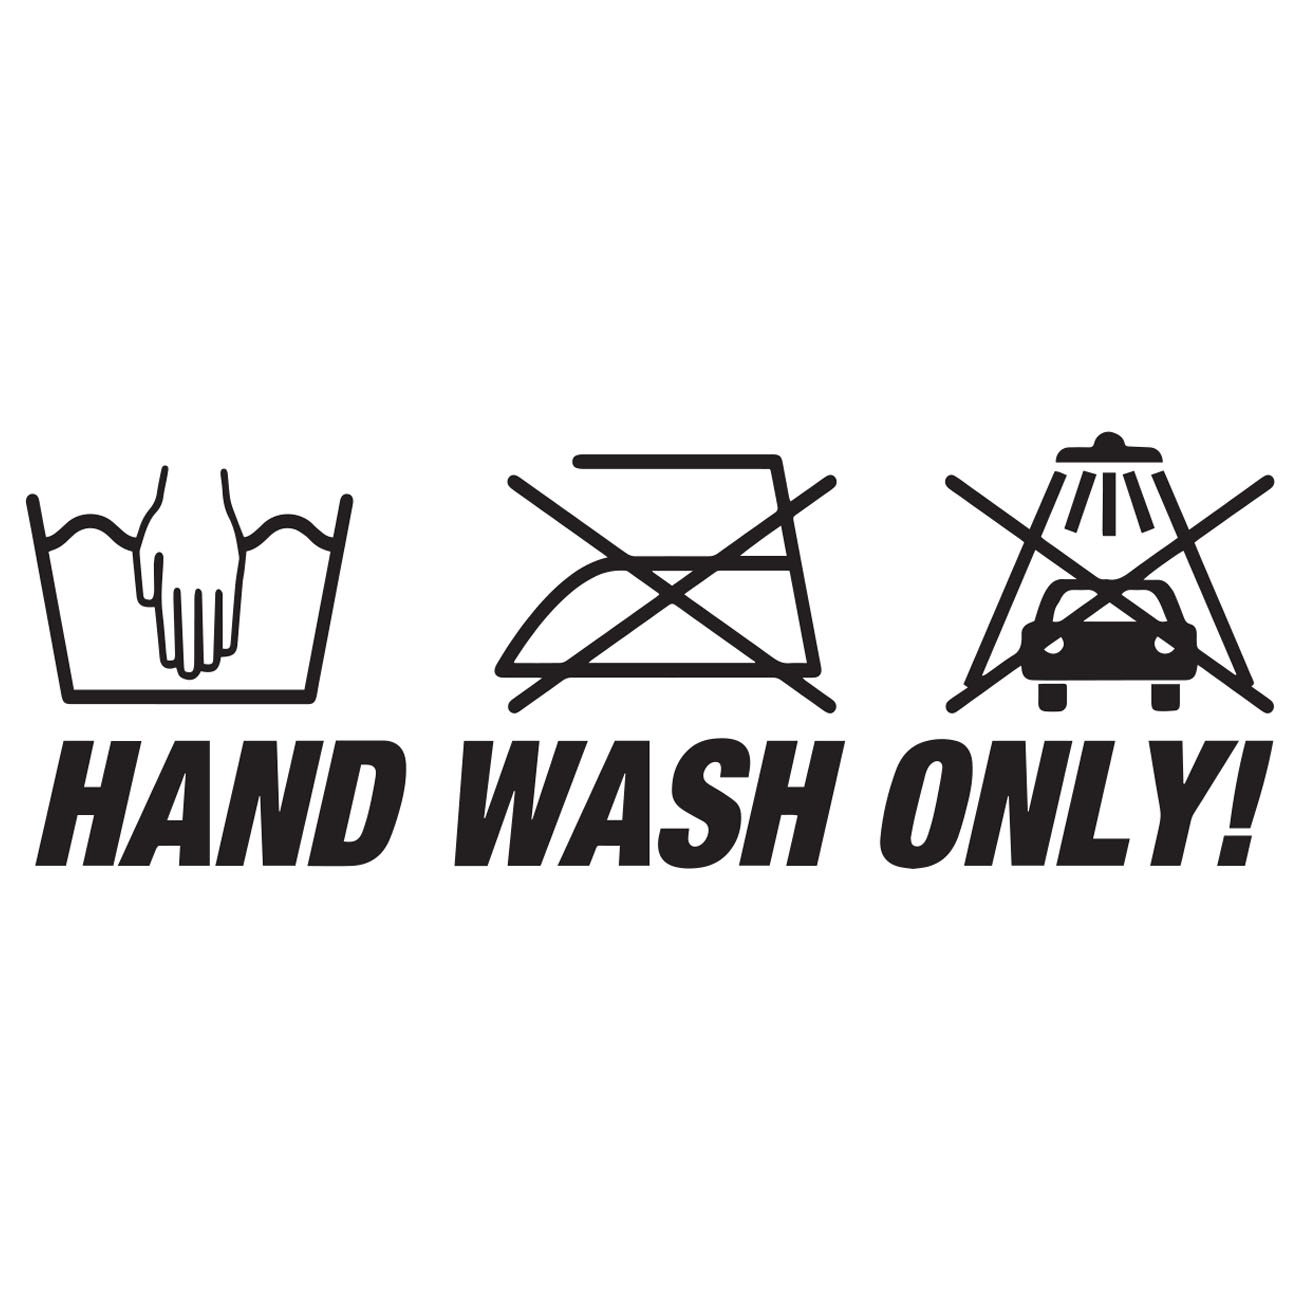 Hand wash only 2